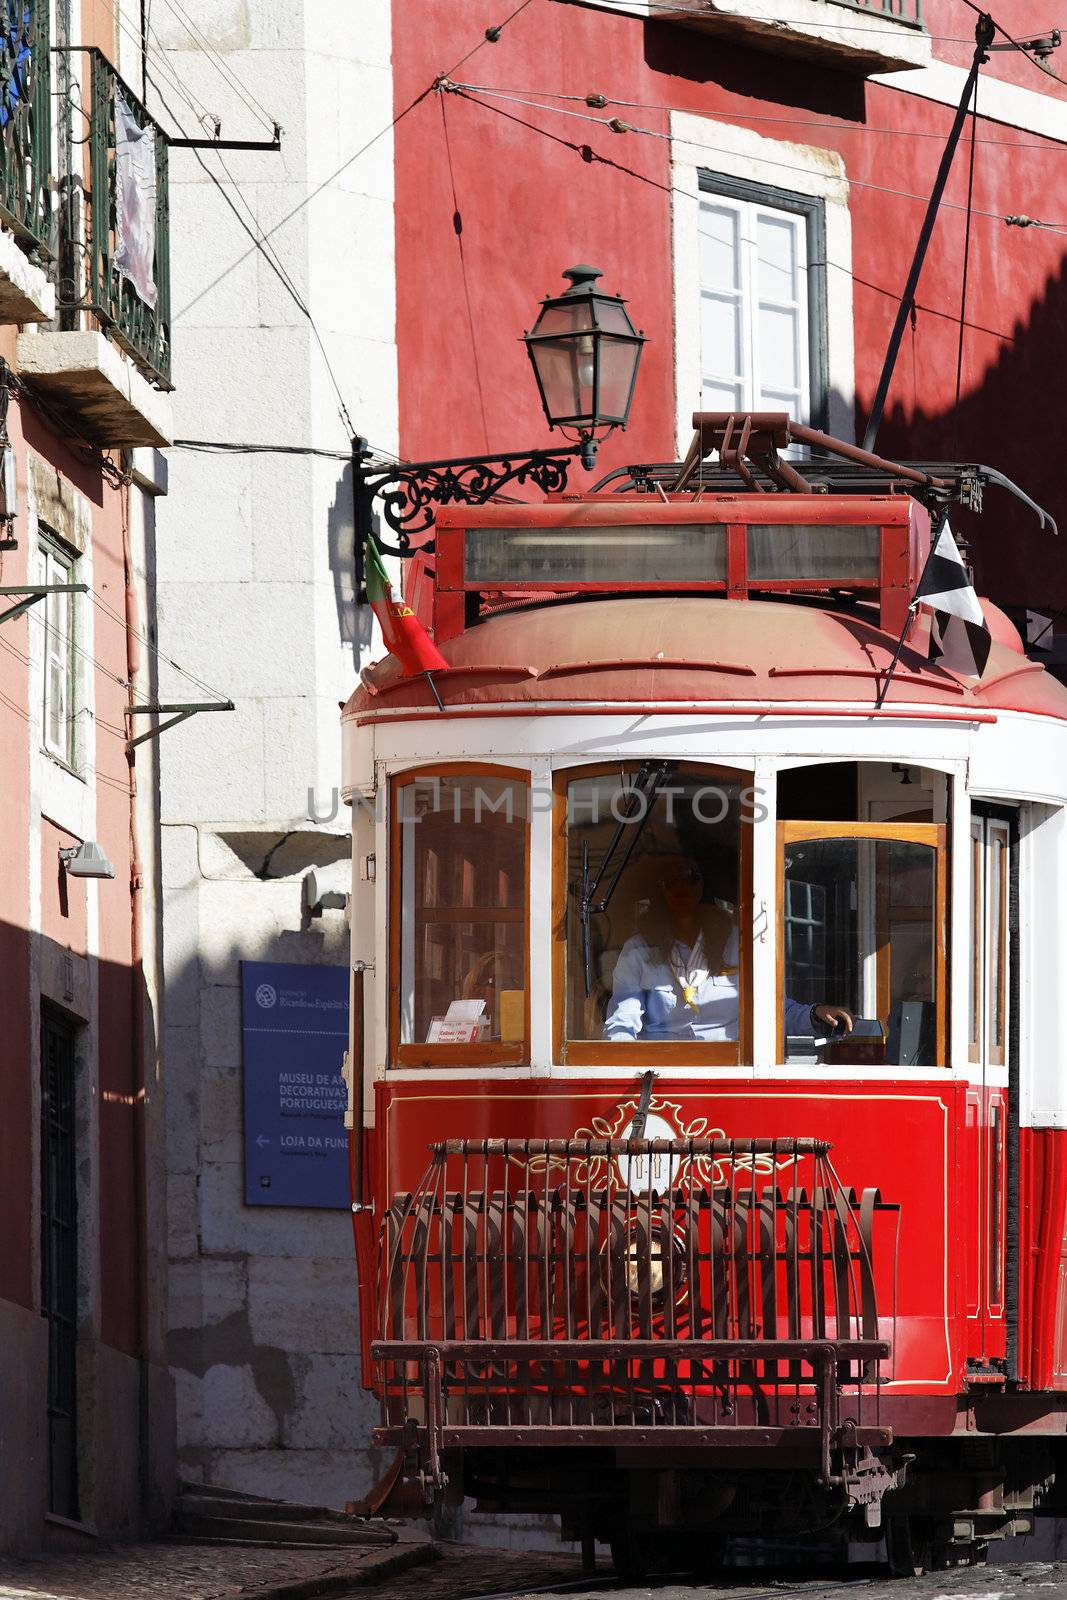 Typical red Tram in Lisbon street, Portugal 